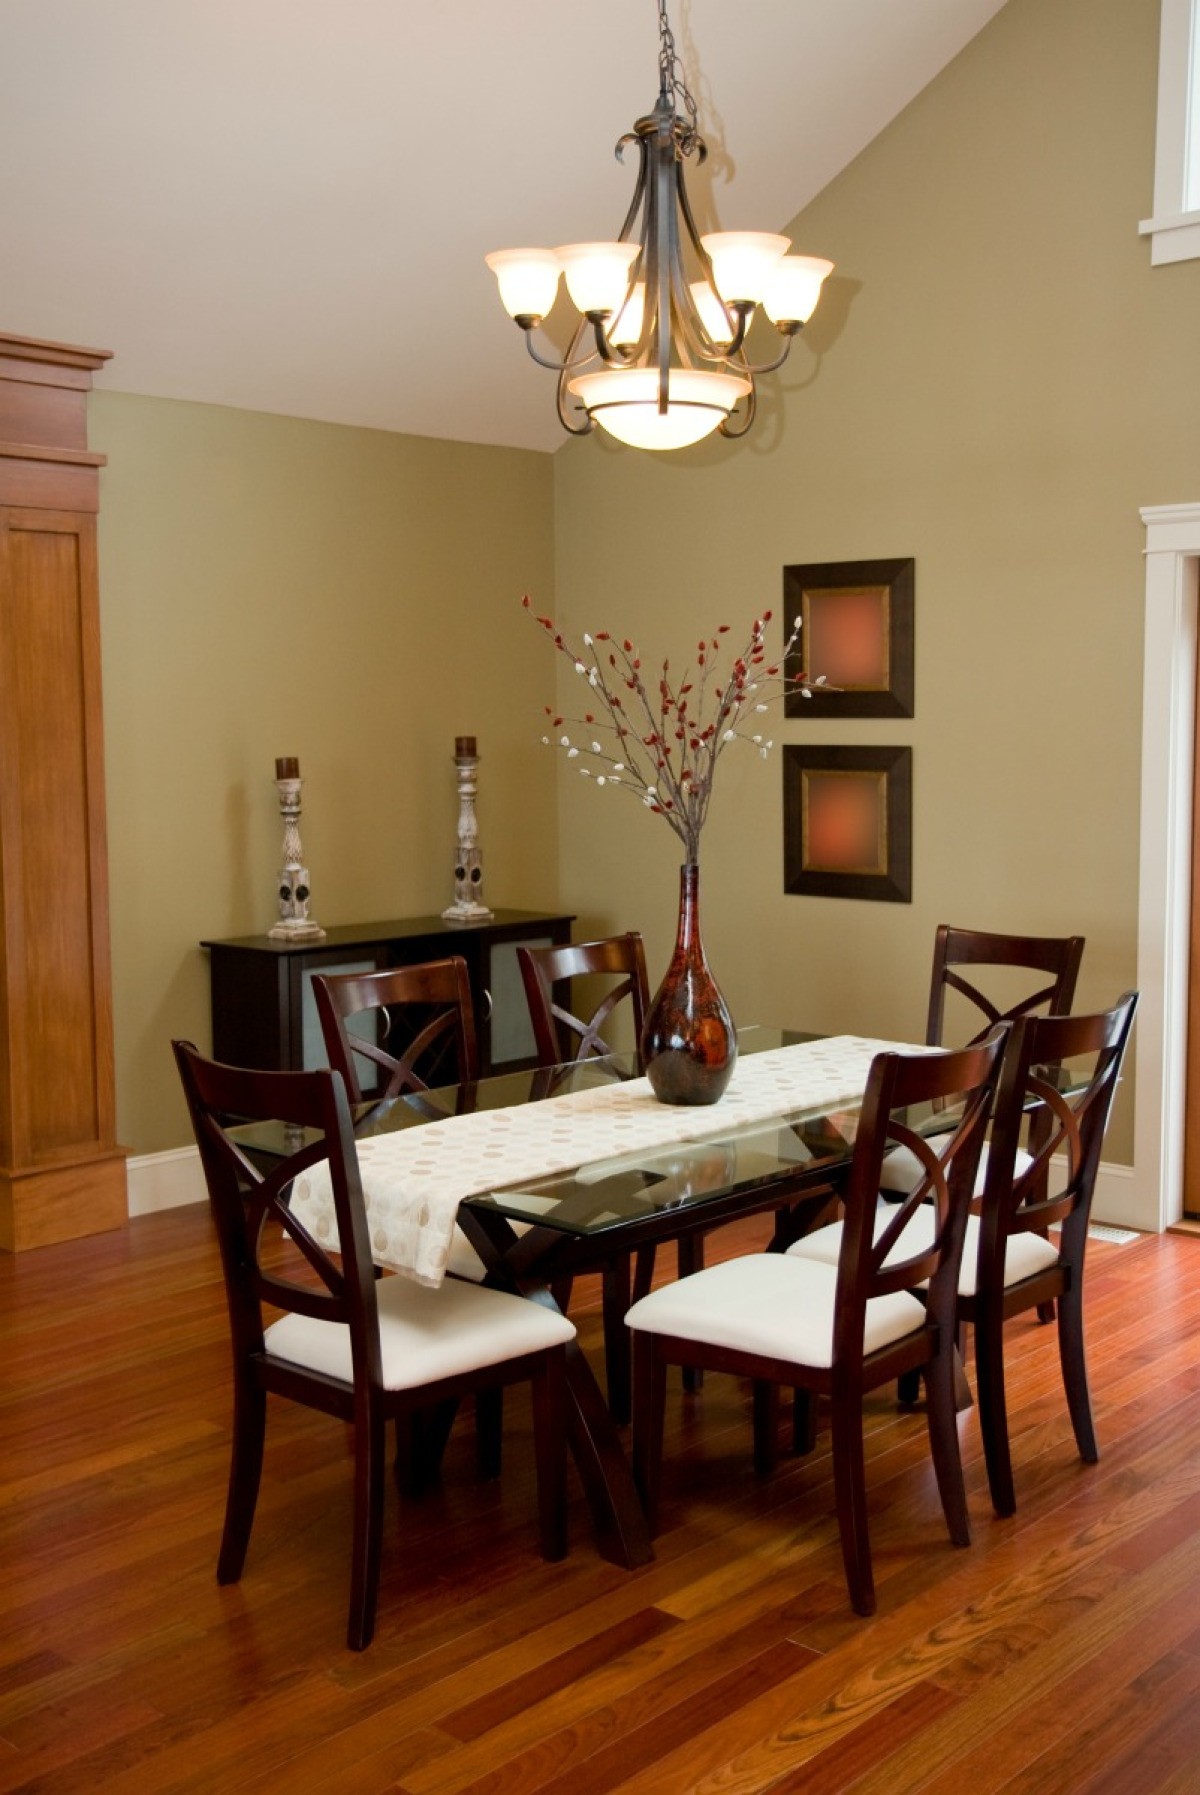 Dining Room Paint Color Advice? | ThriftyFun